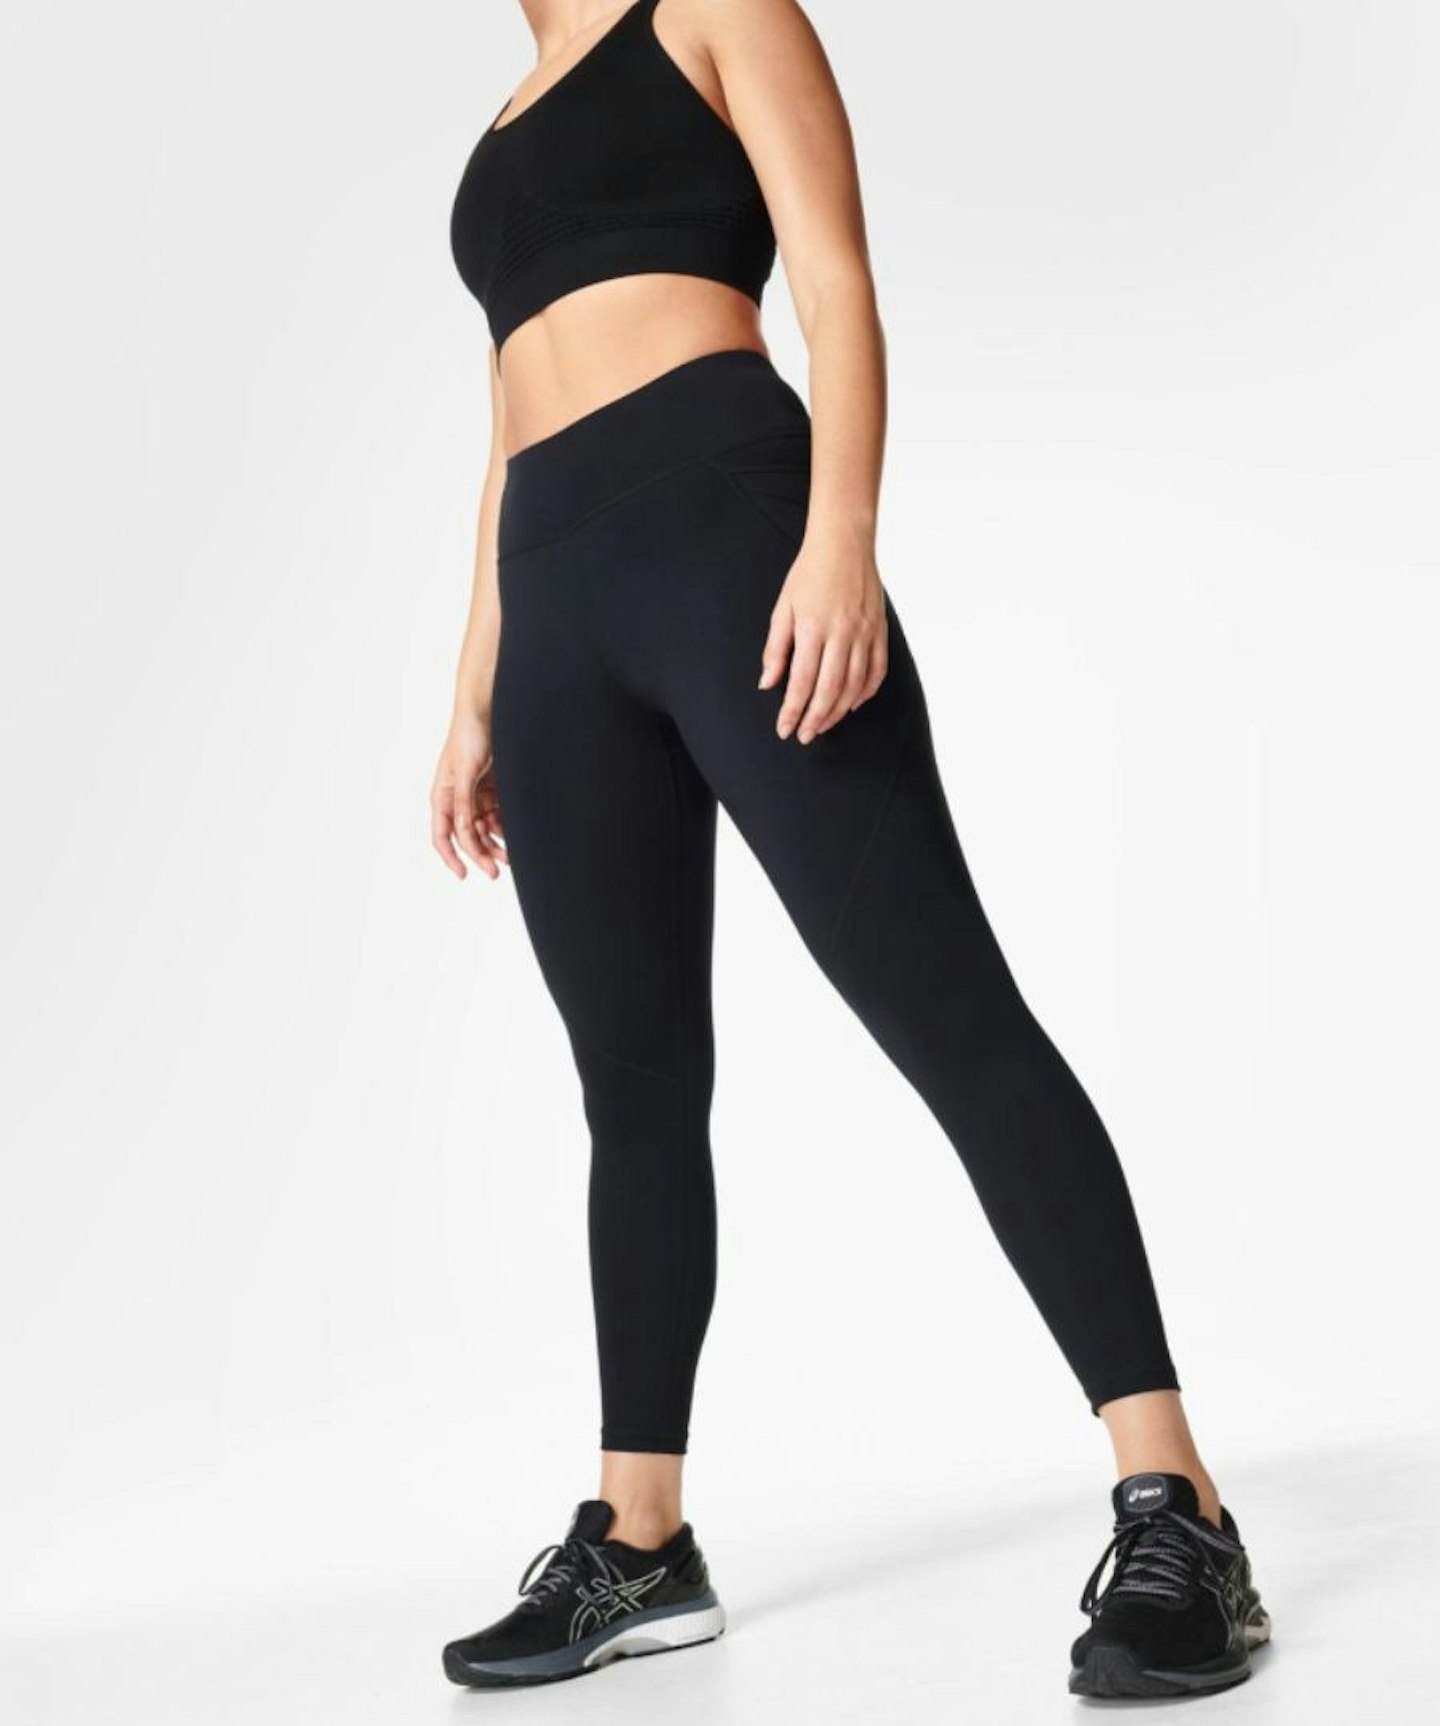 Are All Gymshark Leggings Squat Proofpoint